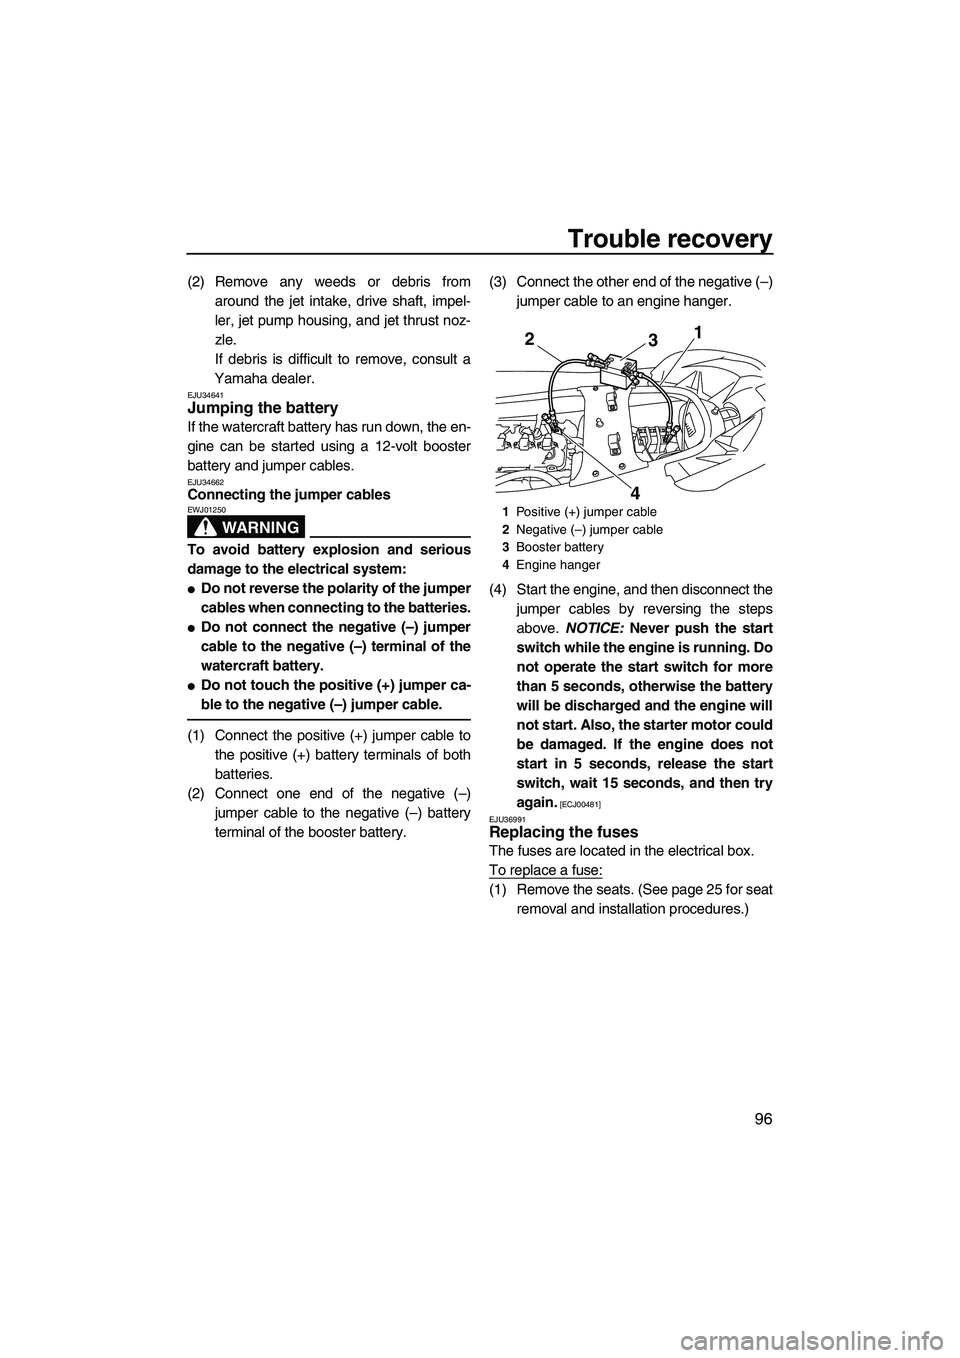 YAMAHA SVHO 2009  Owners Manual Trouble recovery
96
(2) Remove any weeds or debris from
around the jet intake, drive shaft, impel-
ler, jet pump housing, and jet thrust noz-
zle.
If debris is difficult to remove, consult a
Yamaha de